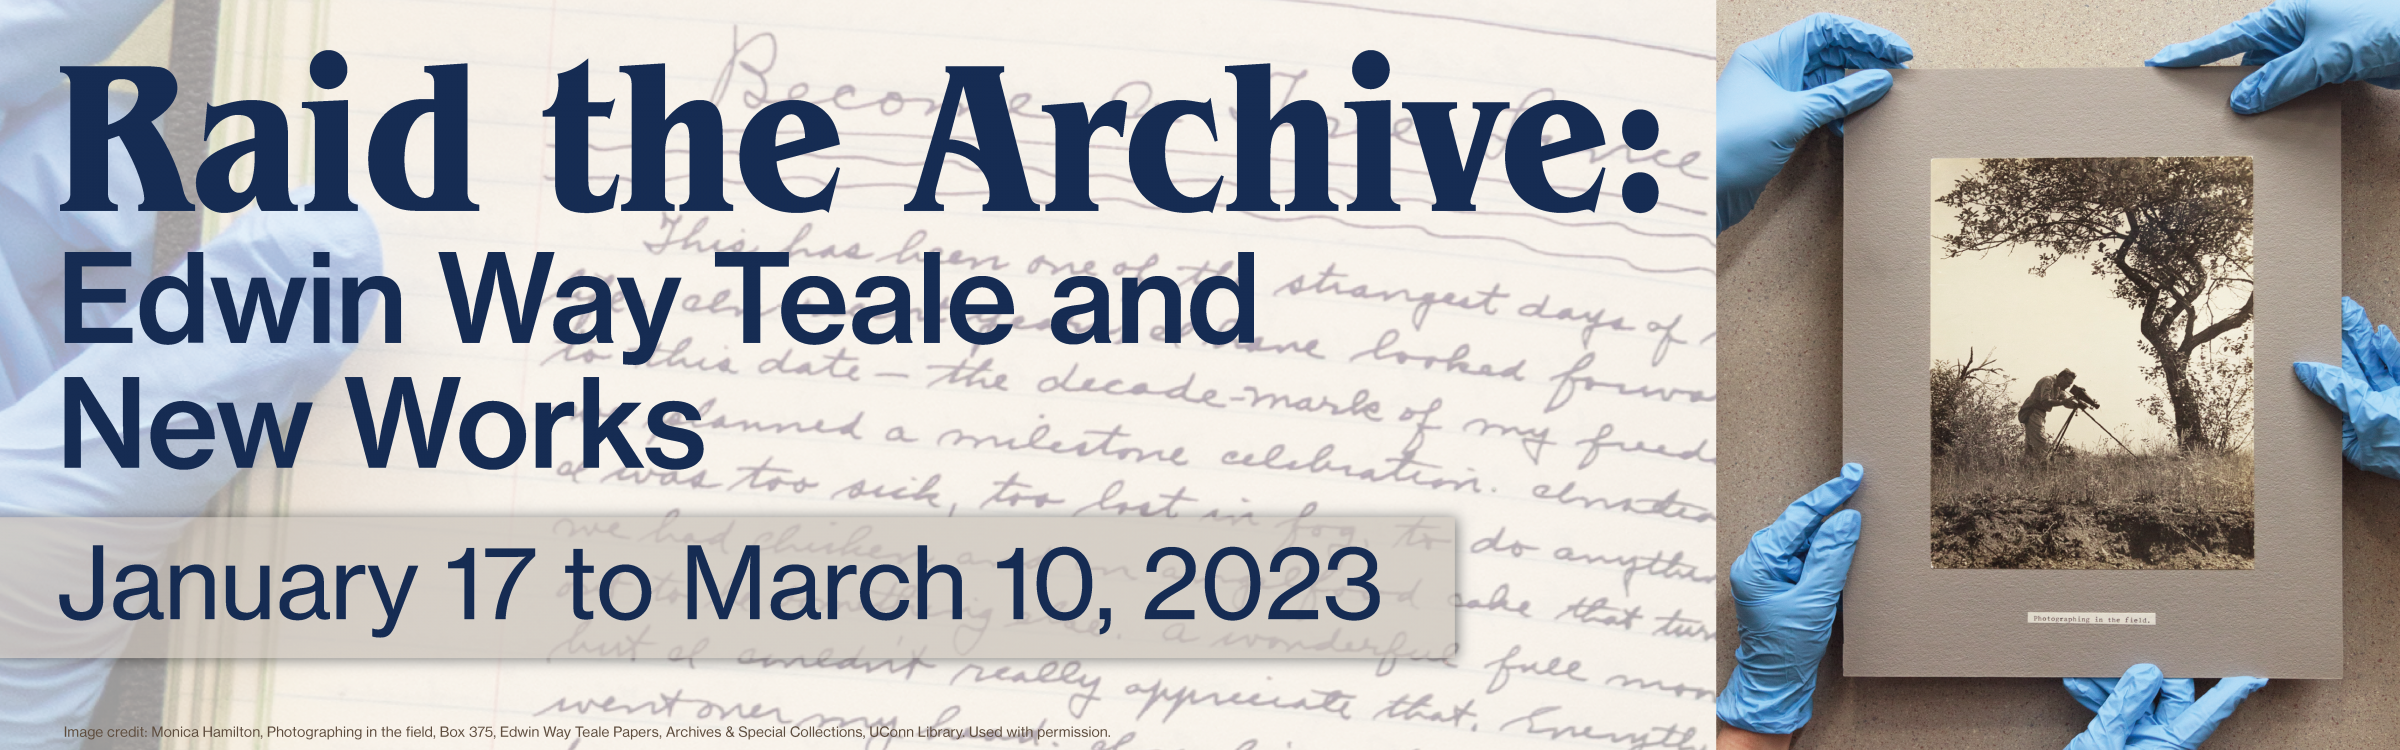 Promotional Banner For "Raid The Archive: Edwin Way Teale and New Works" Exhibition